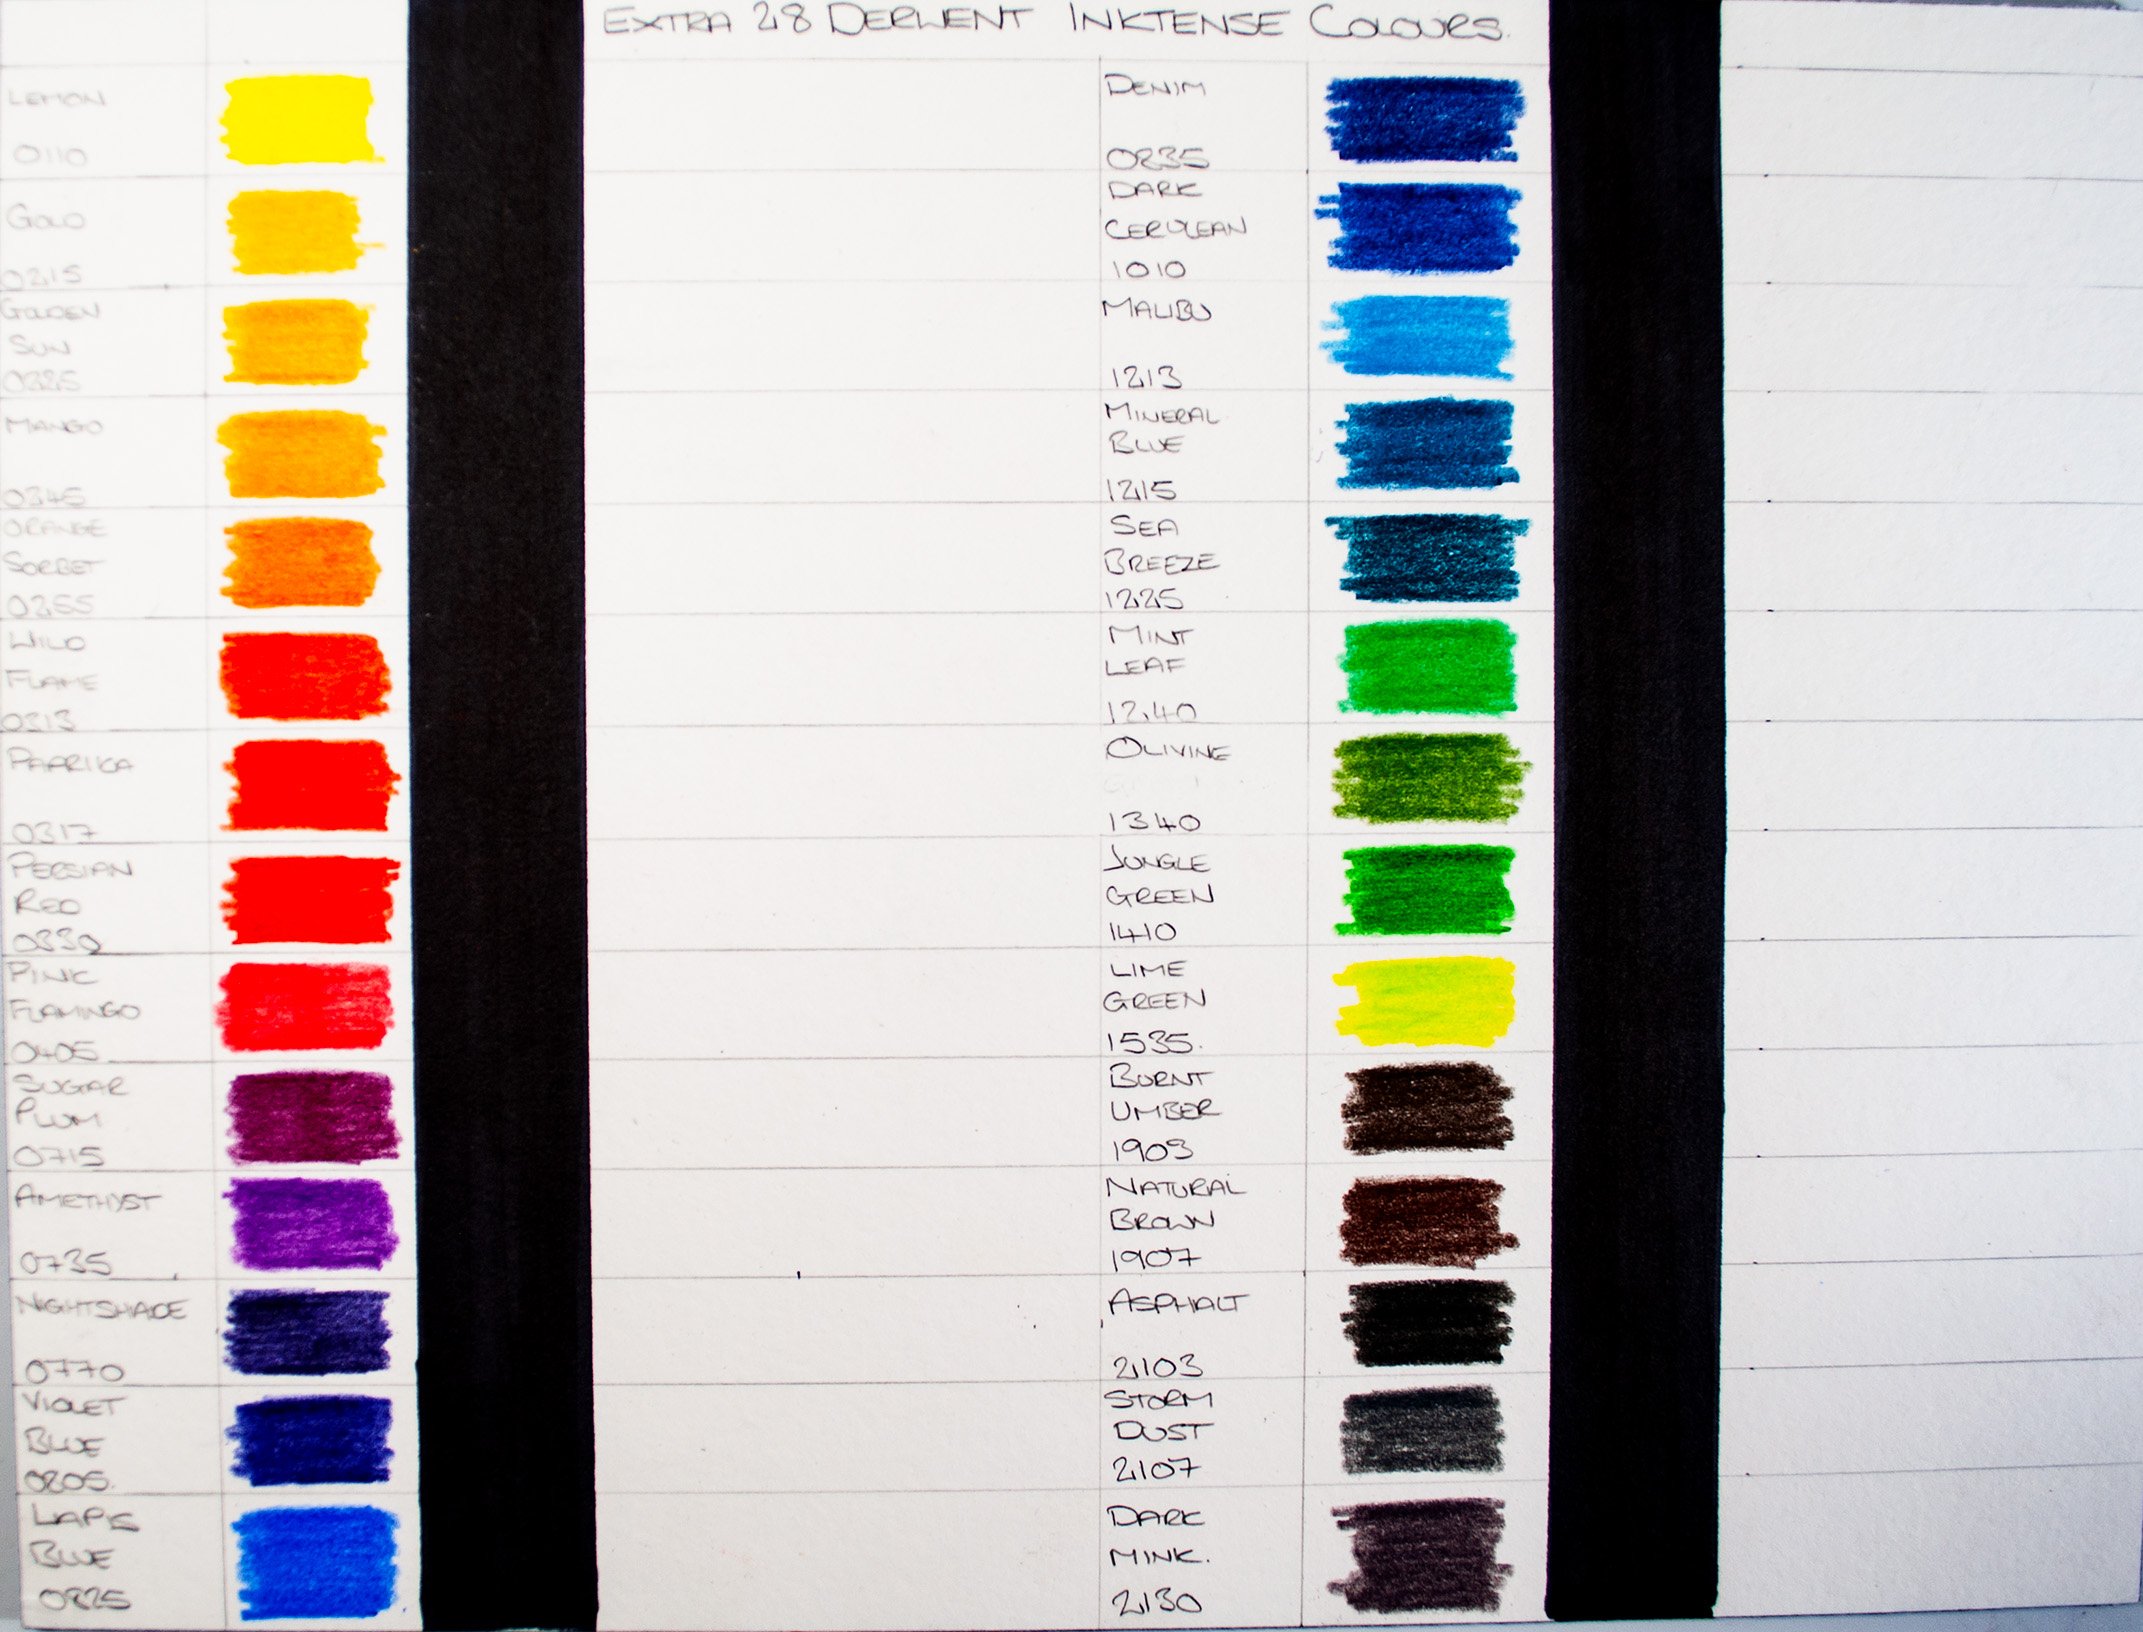 Derwent Inktense 100 Set Review, See Additional 28 Colors 